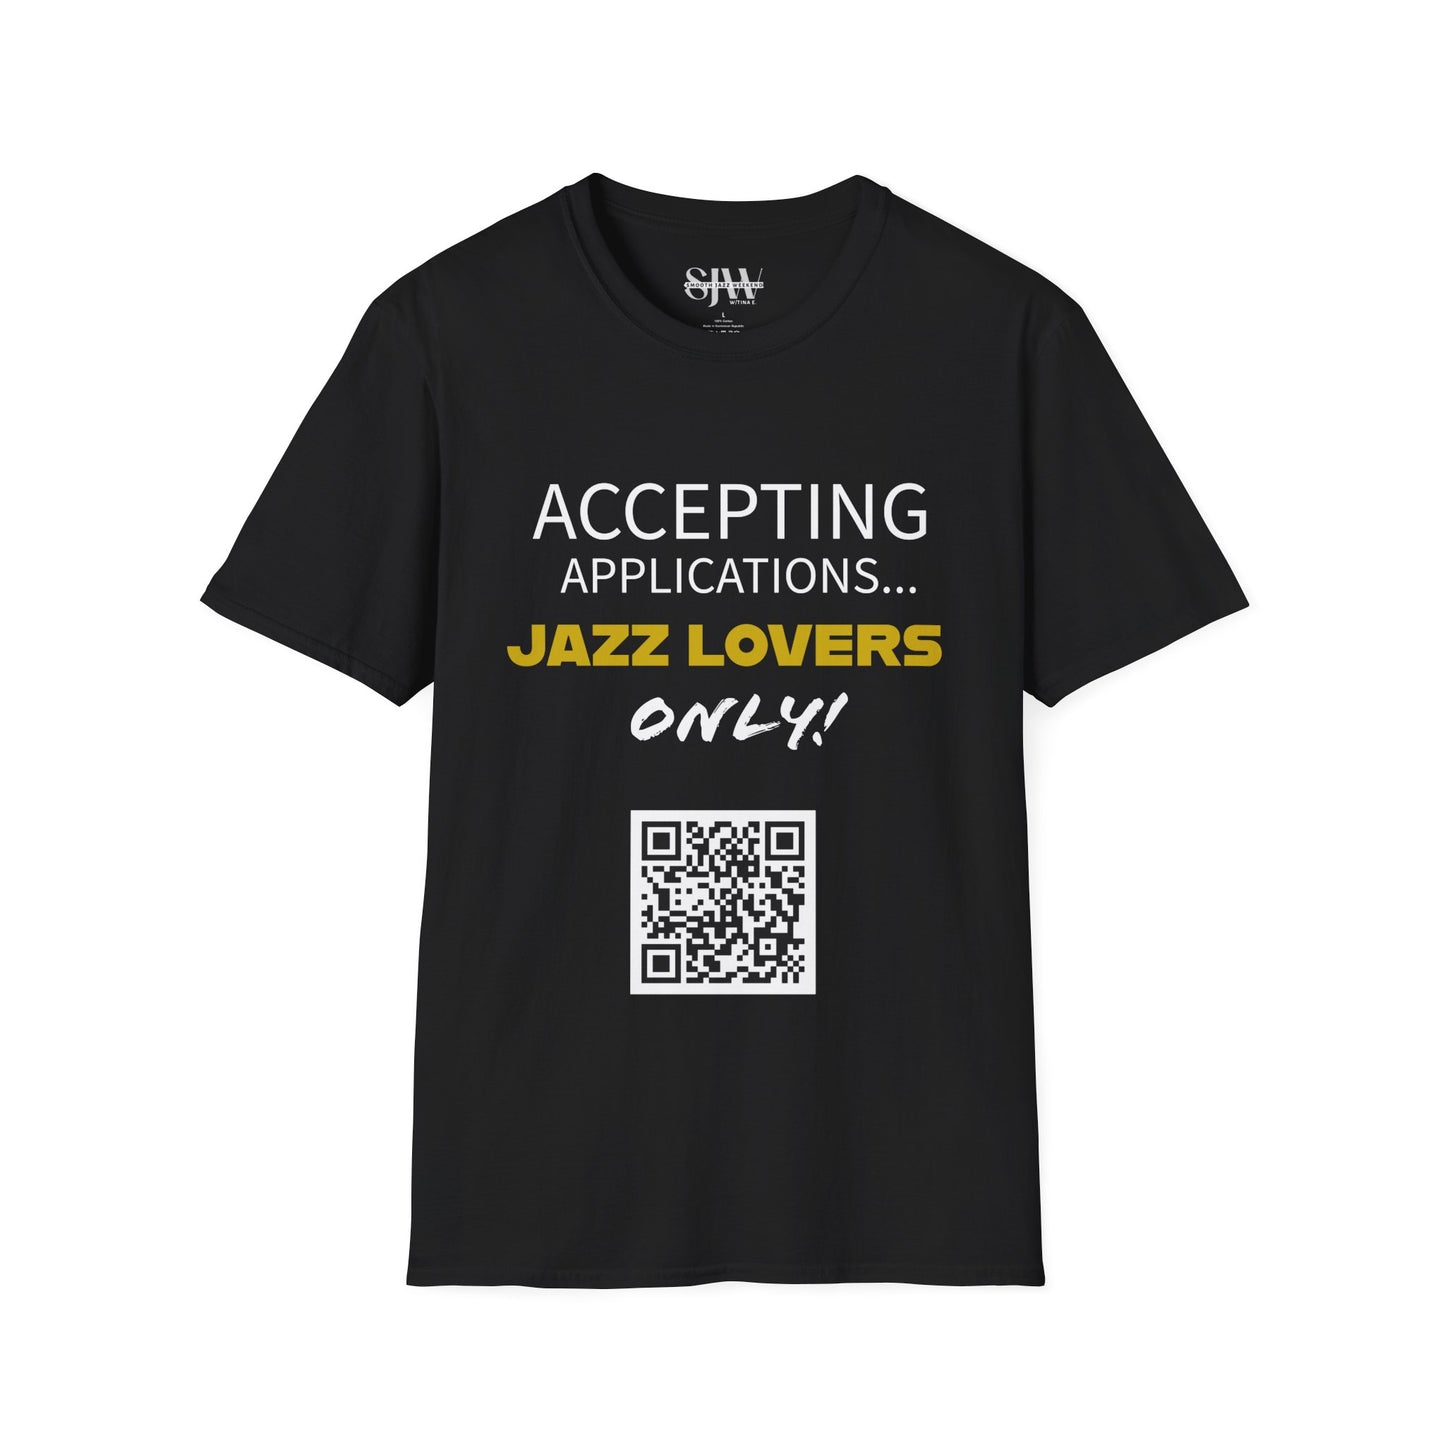 Accepting Applications... Men's Soft style T-Shirt